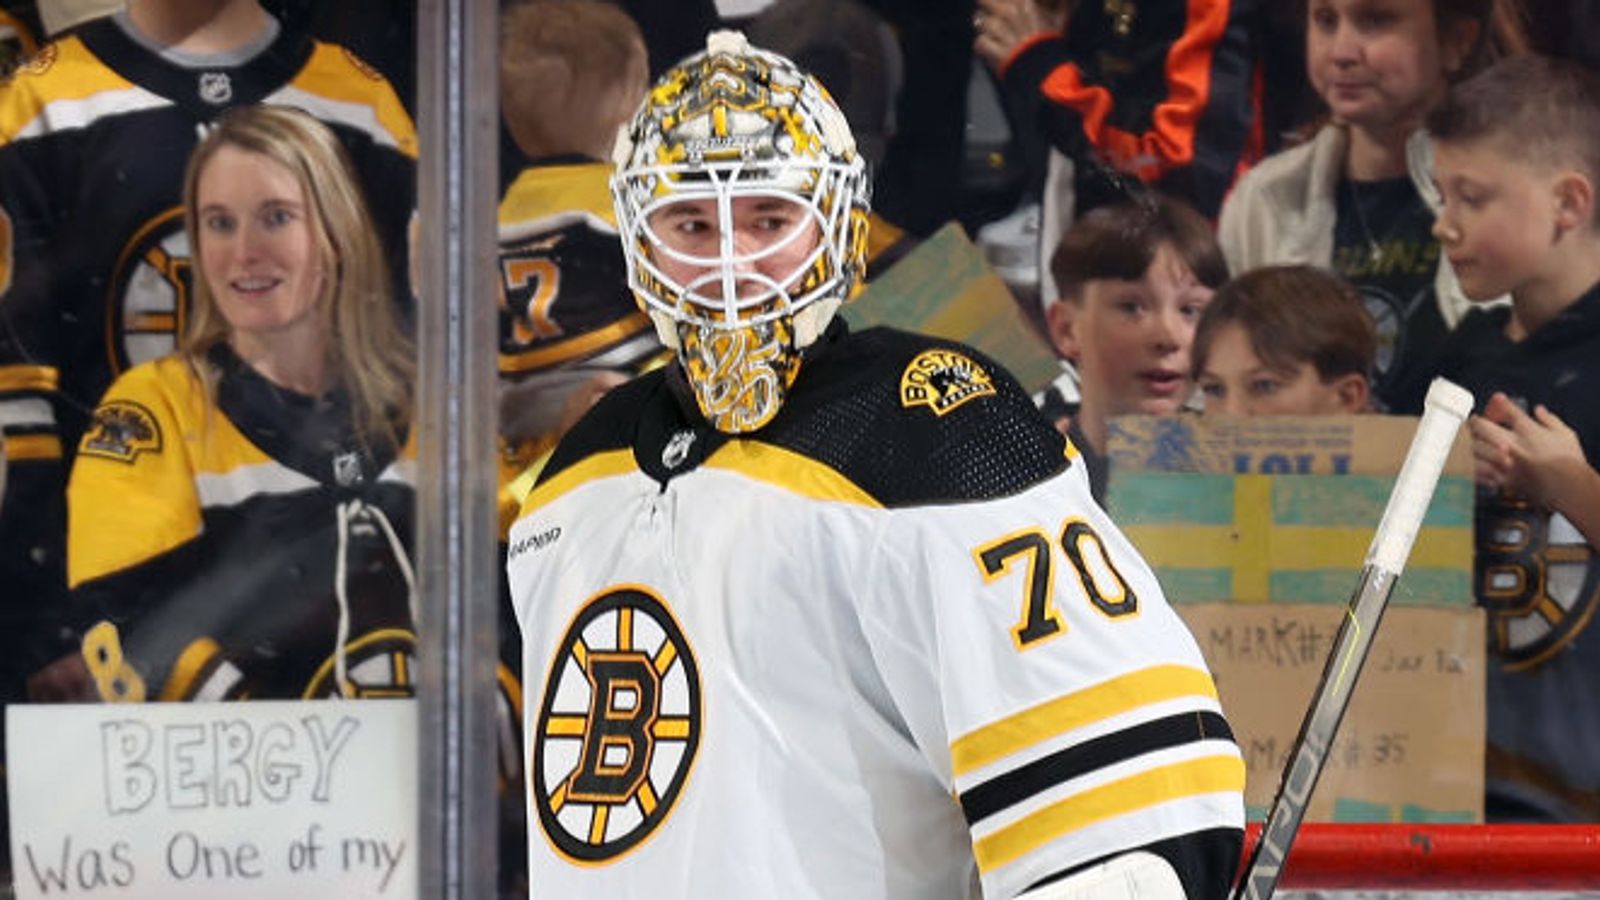 For Bruins goalies Jeremy Swayman and Linus Ullmark, success means